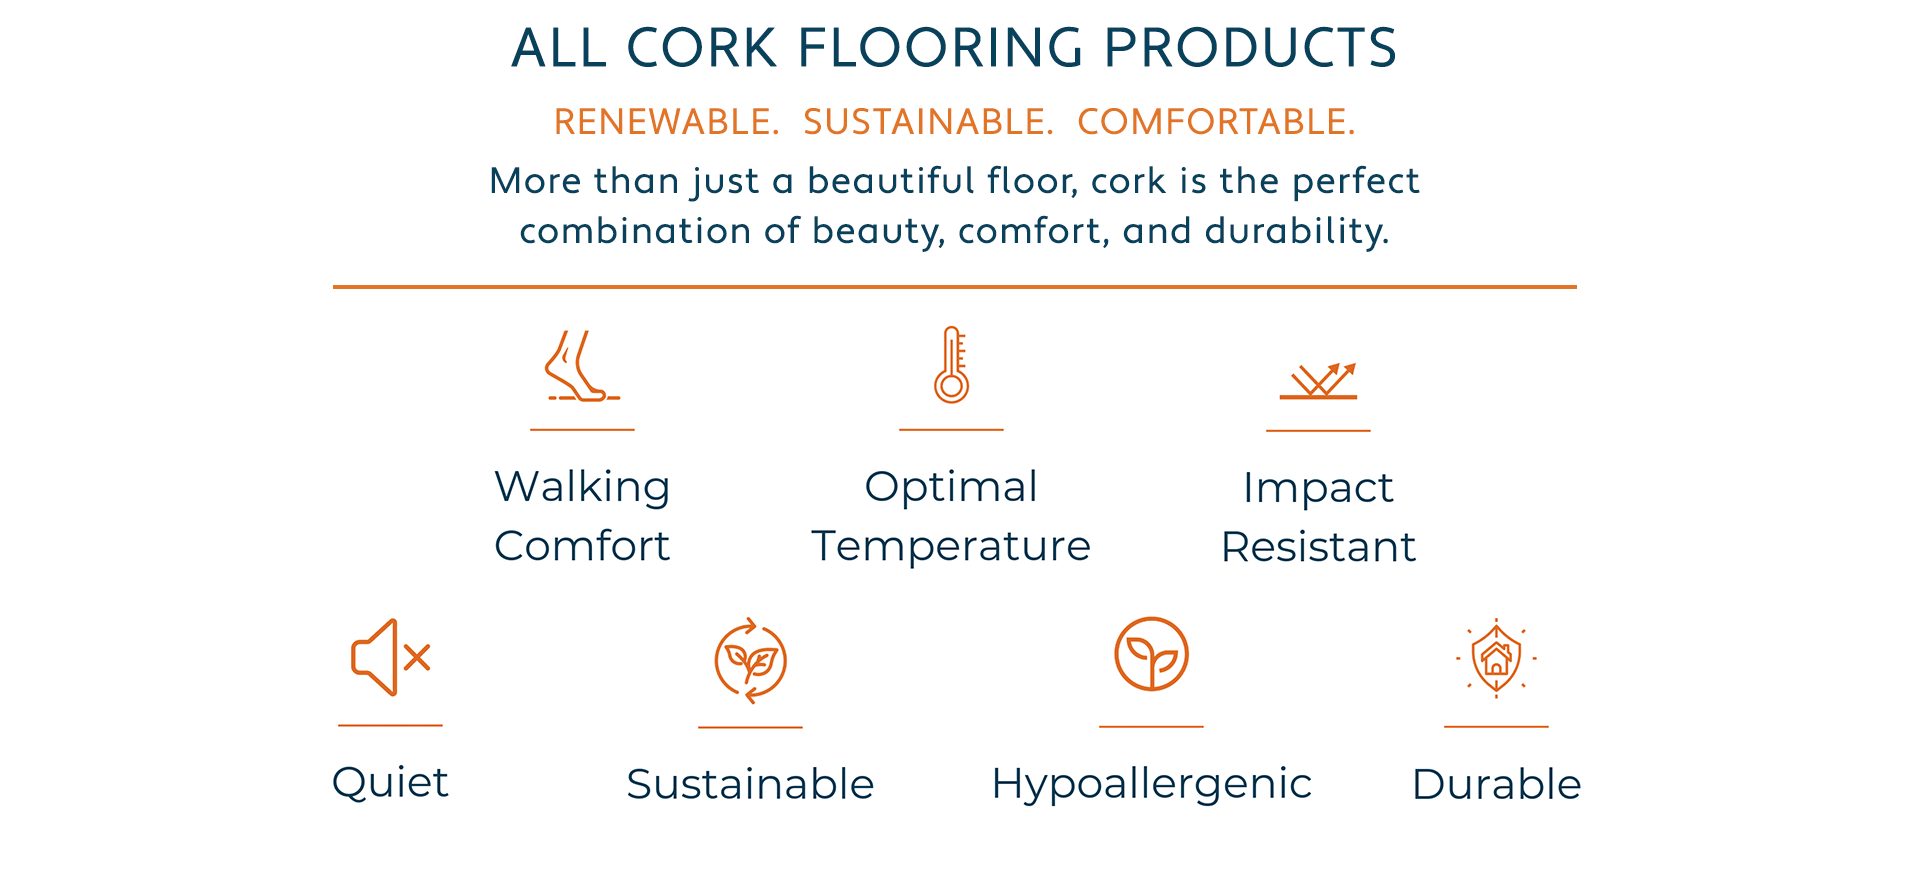 All of our Cork Flooring Products - Cork flooring is Renewable, Sustainable, Comfortable. More than just a beautiful floor, cork is the perfect combination of beauty, comfort and durability.  Benefits of cork flooring include: Walking Comfort, Optimal Temperature, Impact Resistance, Silence, Sustainability, Hypoallergenic, and Durability